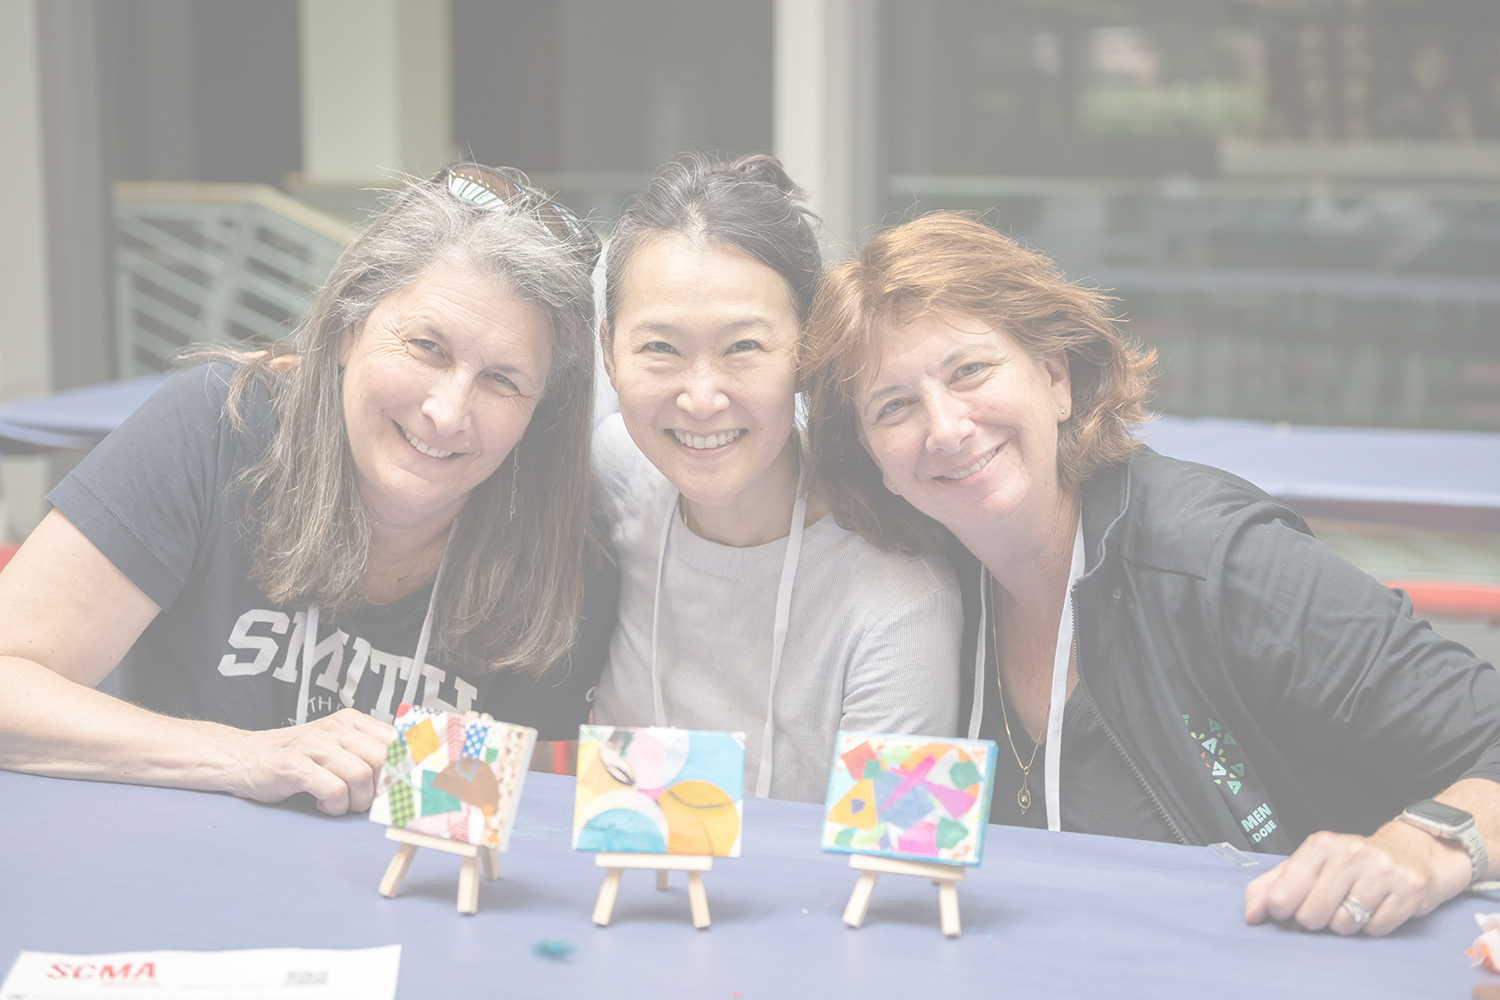 Three medium to light skinned women smiling and posing for the camera while sitting at a table with mini-canvases of art on a mini-easel in front of each person.